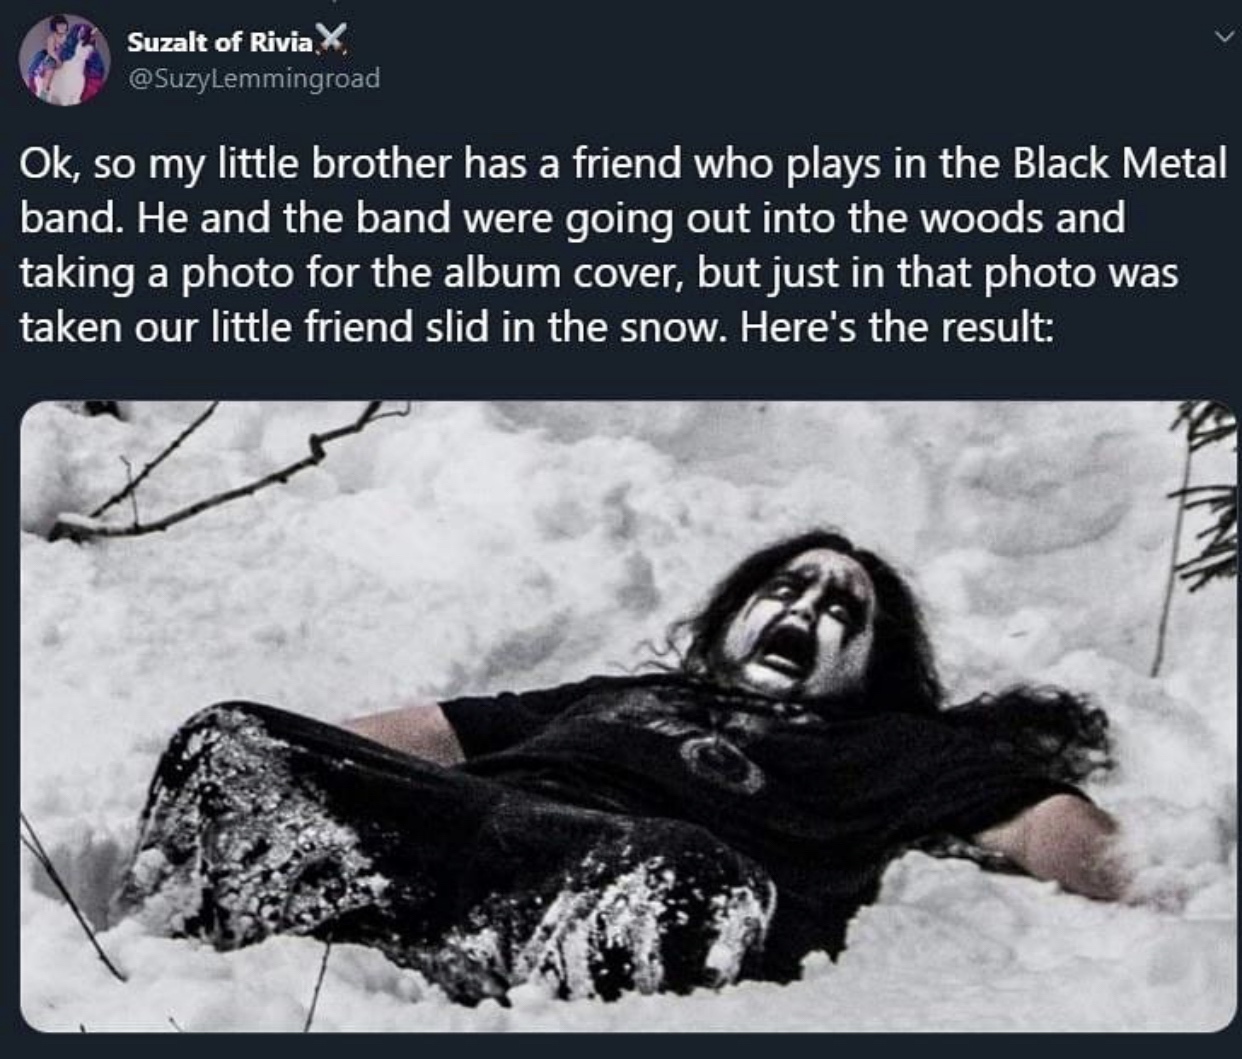 black metal funny - Suzalt of Rivia X Ok, so my little brother has a friend who plays in the Black Metal band. He and the band were going out into the woods and taking a photo for the album cover, but just in that photo was taken our little friend slid in